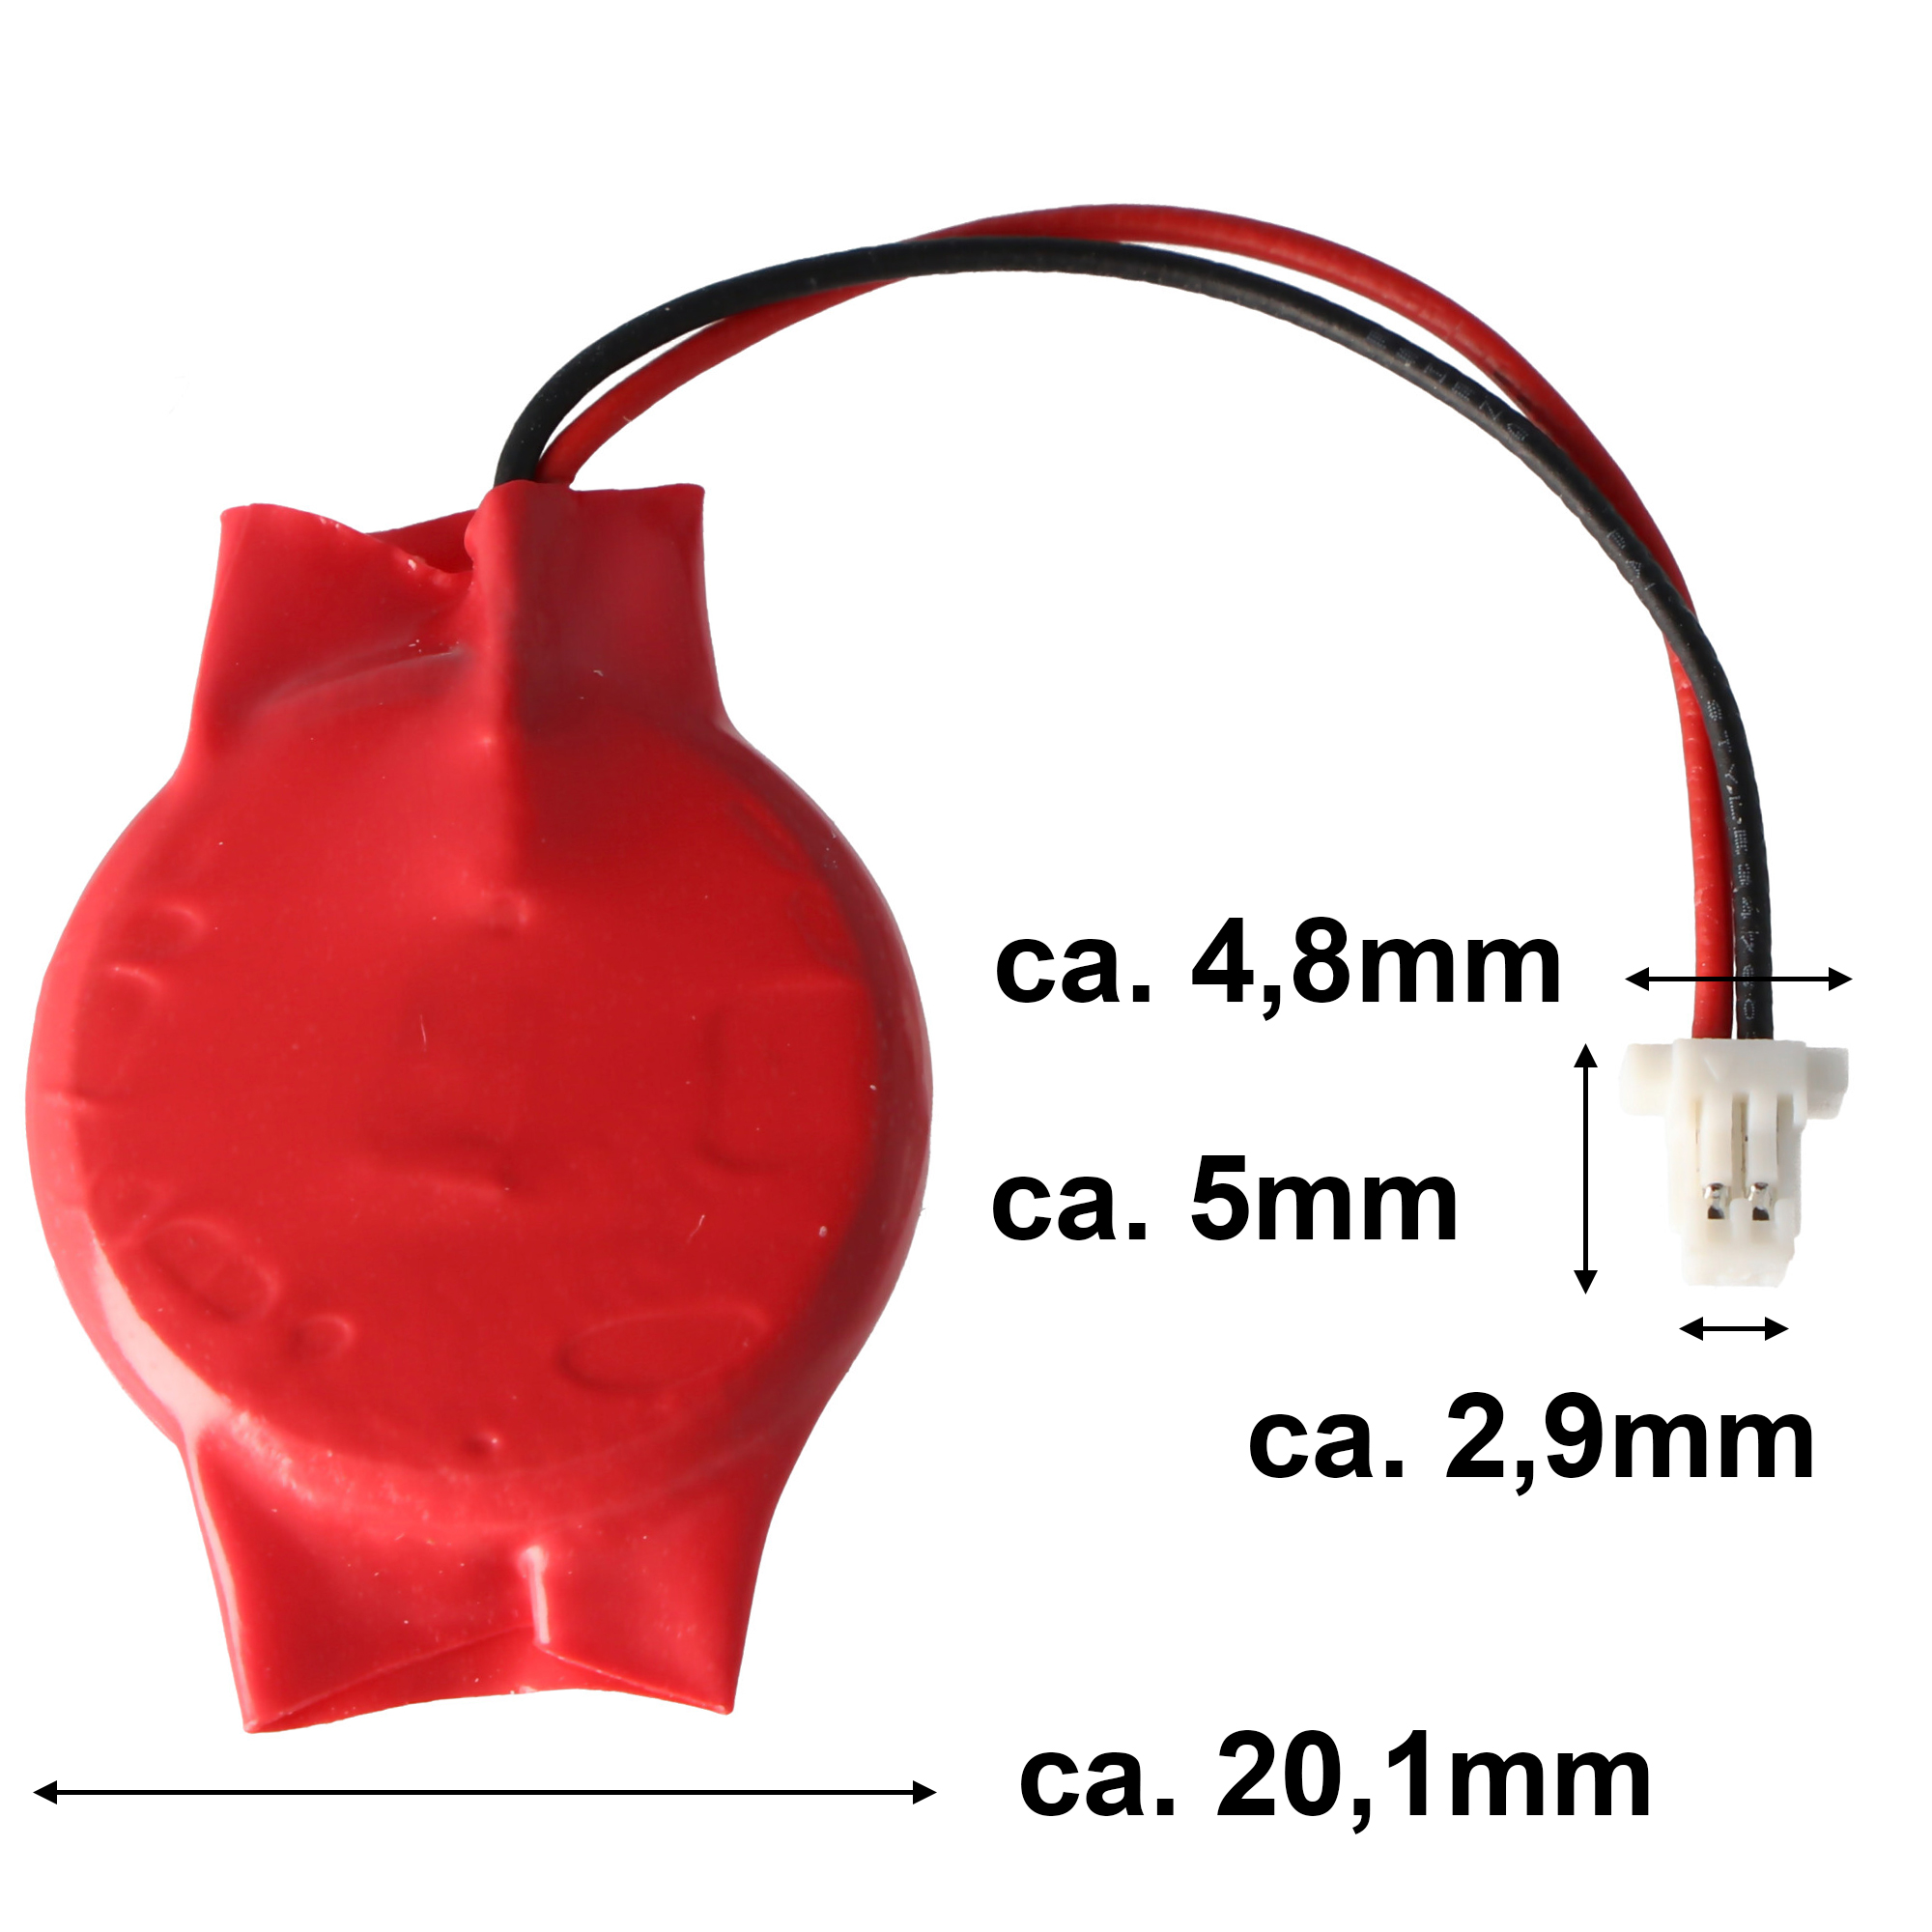 AccuCell CMOS Batterie CR2032 mit Stecker, Backup Lithium Batterie